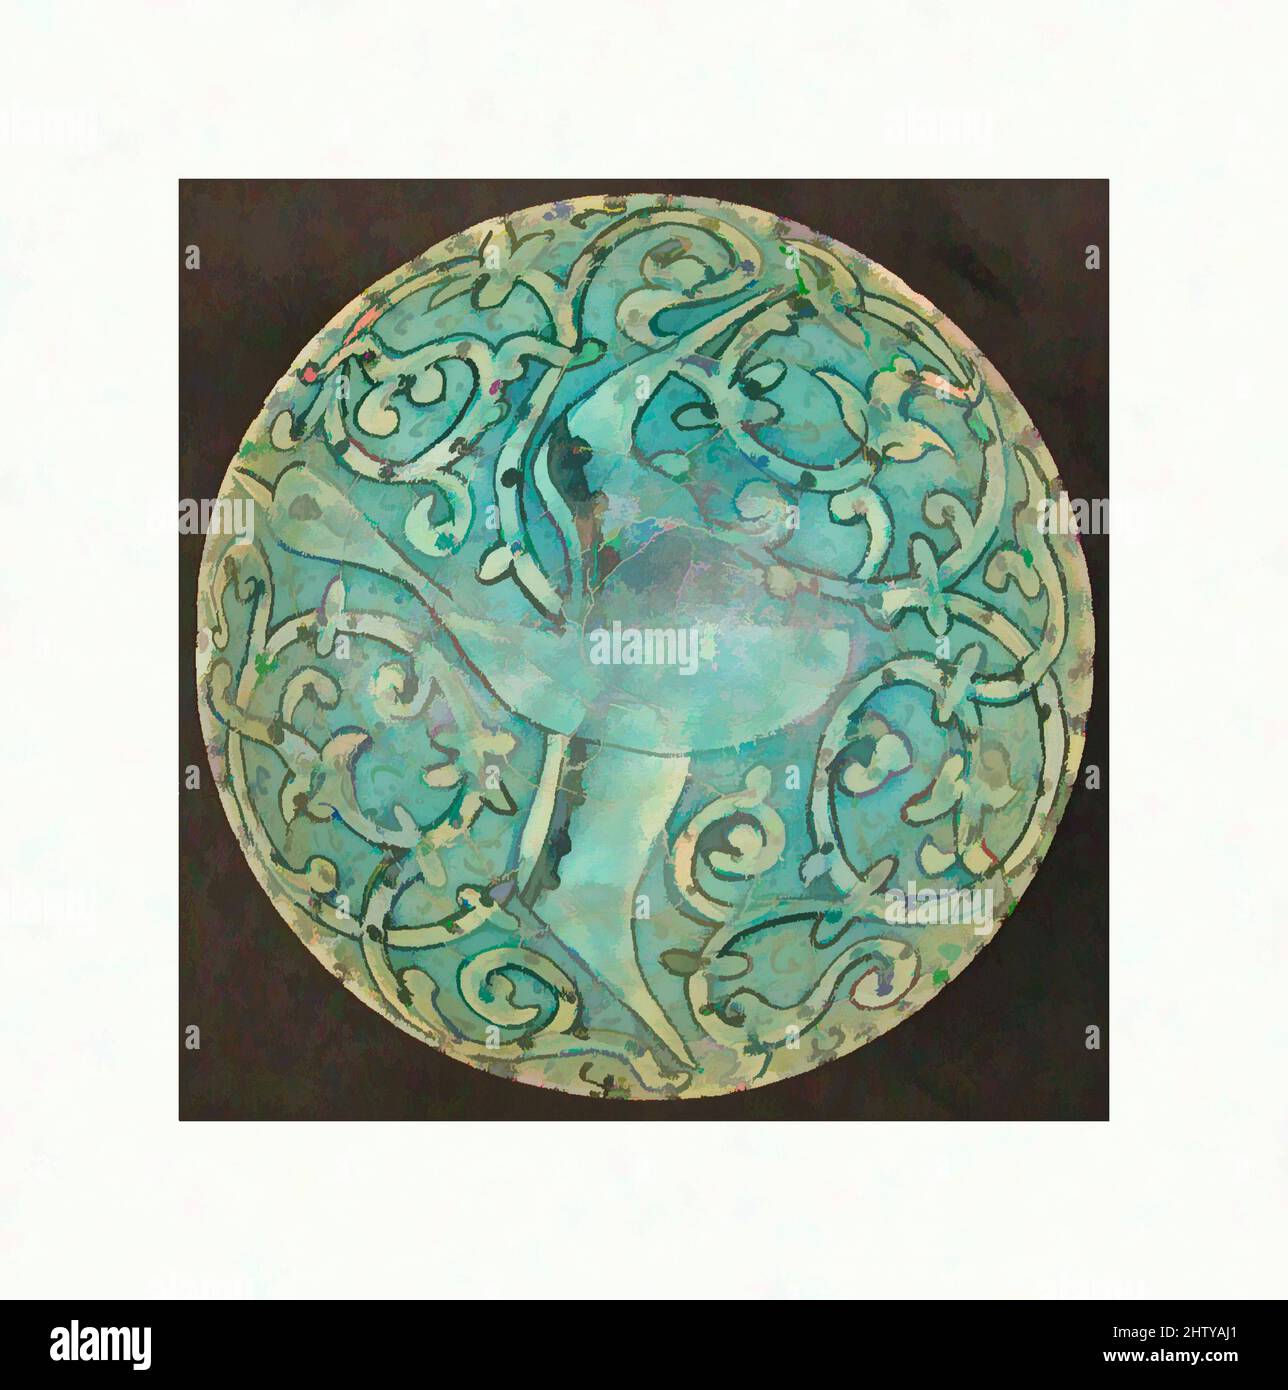 Art inspired by Bowl, early 14th century, Attributed to Iran, Stonepaste; molded and painted under transparent glaze, H. 2 13/16 in. (7.1 cm), Ceramics, Classic works modernized by Artotop with a splash of modernity. Shapes, color and value, eye-catching visual impact on art. Emotions through freedom of artworks in a contemporary way. A timeless message pursuing a wildly creative new direction. Artists turning to the digital medium and creating the Artotop NFT Stock Photo